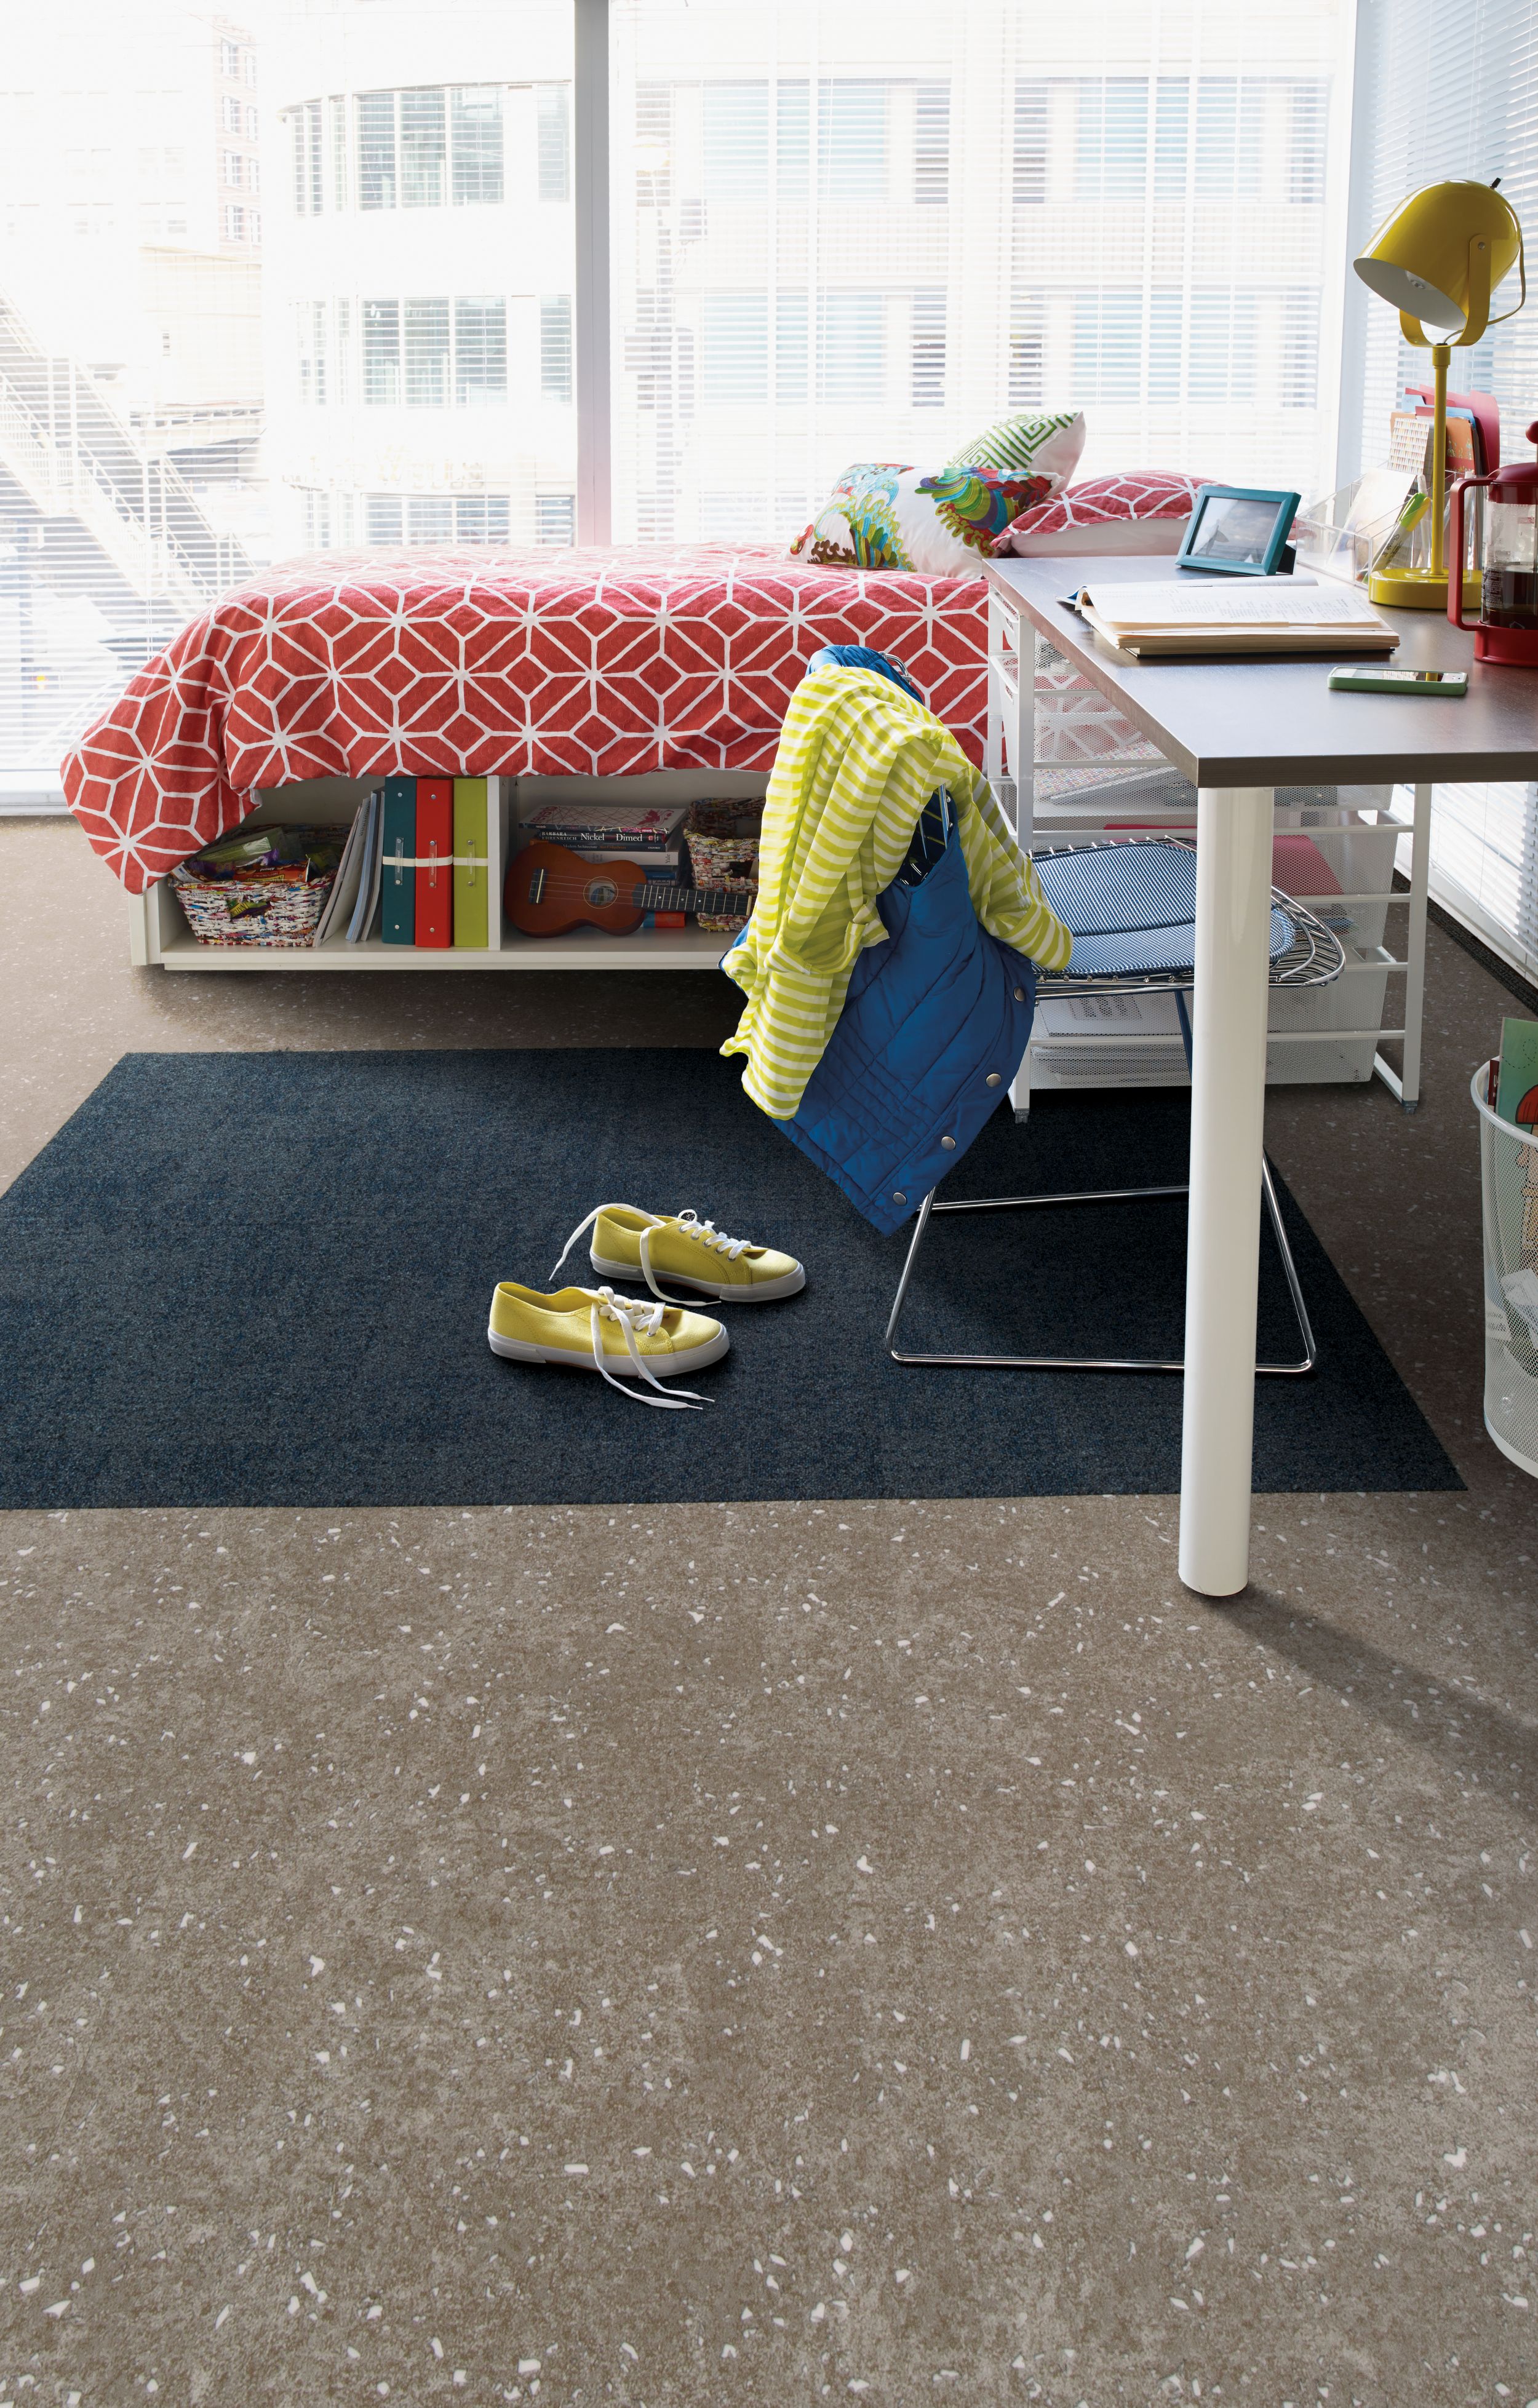 image Interface Step in Time carpet tile and Walk the Aisle LVT in a dorm room numéro 6